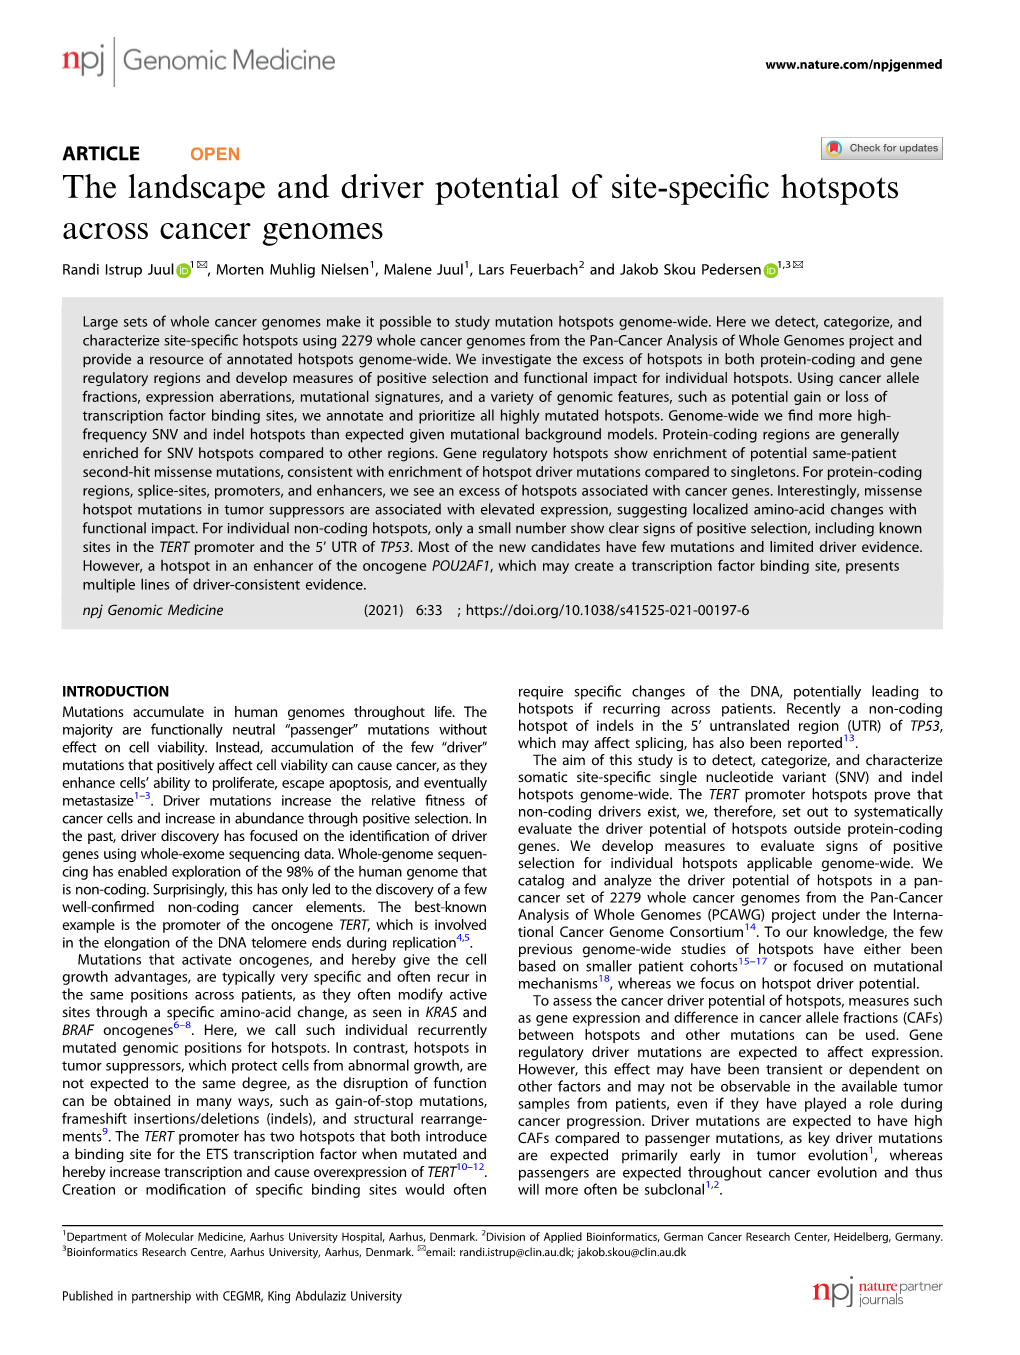 The Landscape and Driver Potential of Site-Specific Hotspots Across Cancer